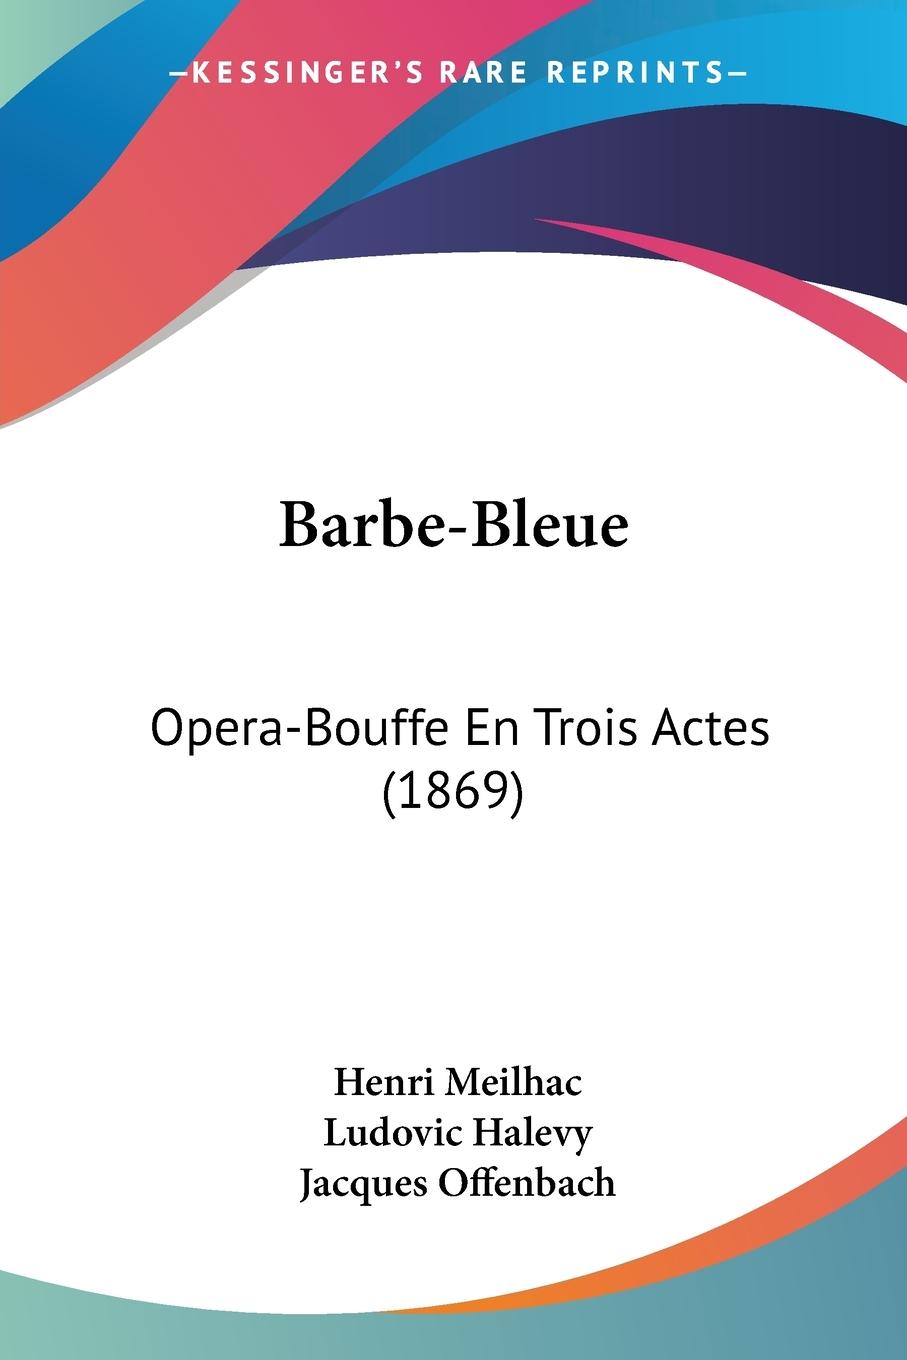 Barbe-Bleue - Meilhac, Henri Halevy, Ludovic Offenbach, Jacques